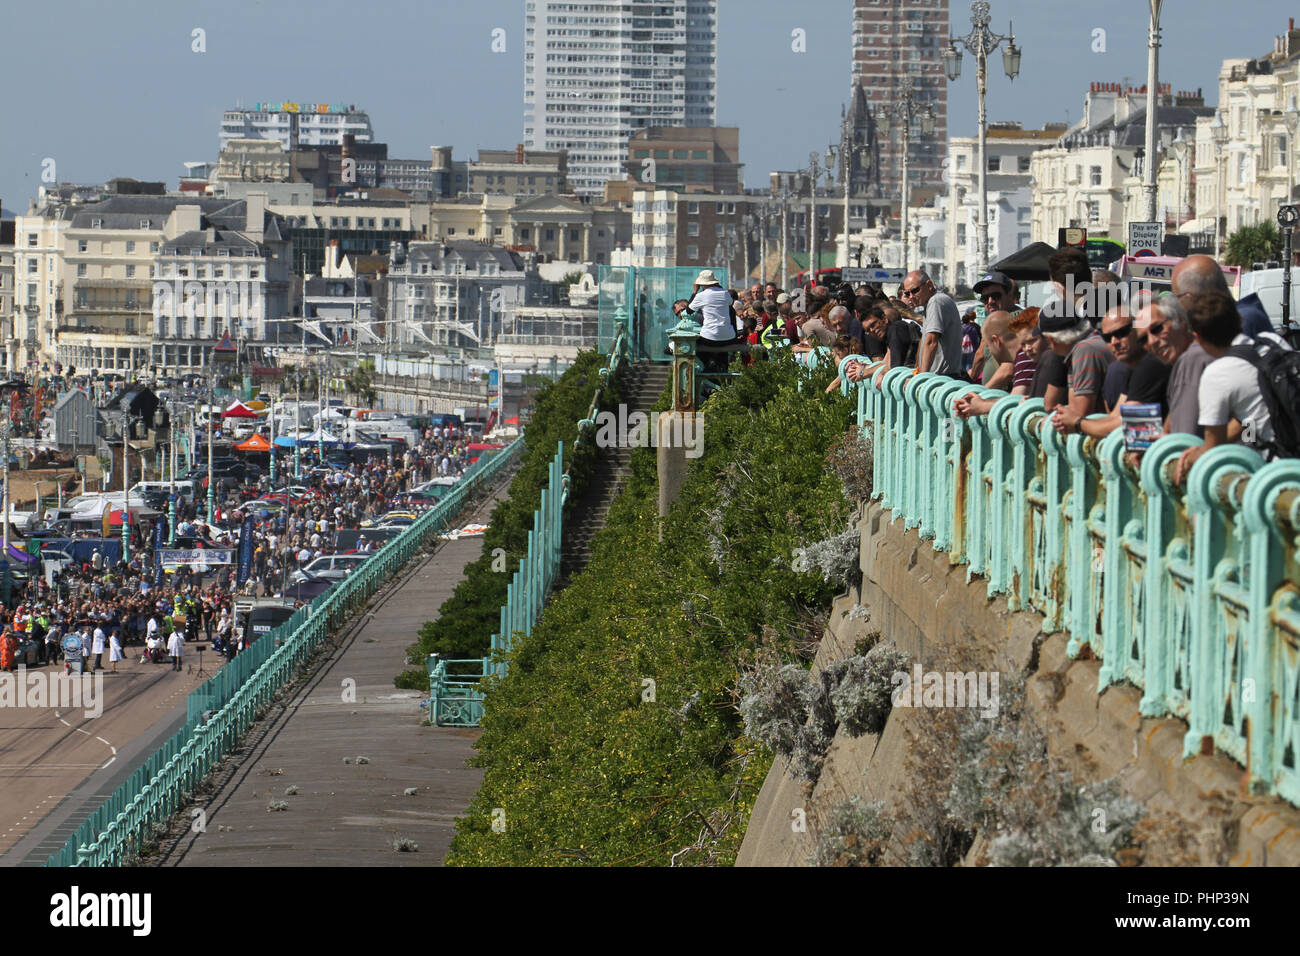 Brighton, UK. 1st September 2018: People watching the National Speed Trials that run along Madeira Drive in Brighton on 1 September 2018.   The Pier, in the central waterfront section, opened in 1899 houses amusement rides as well as food kiosks.Credit: David Mbiyu /Alamy Live News Stock Photo